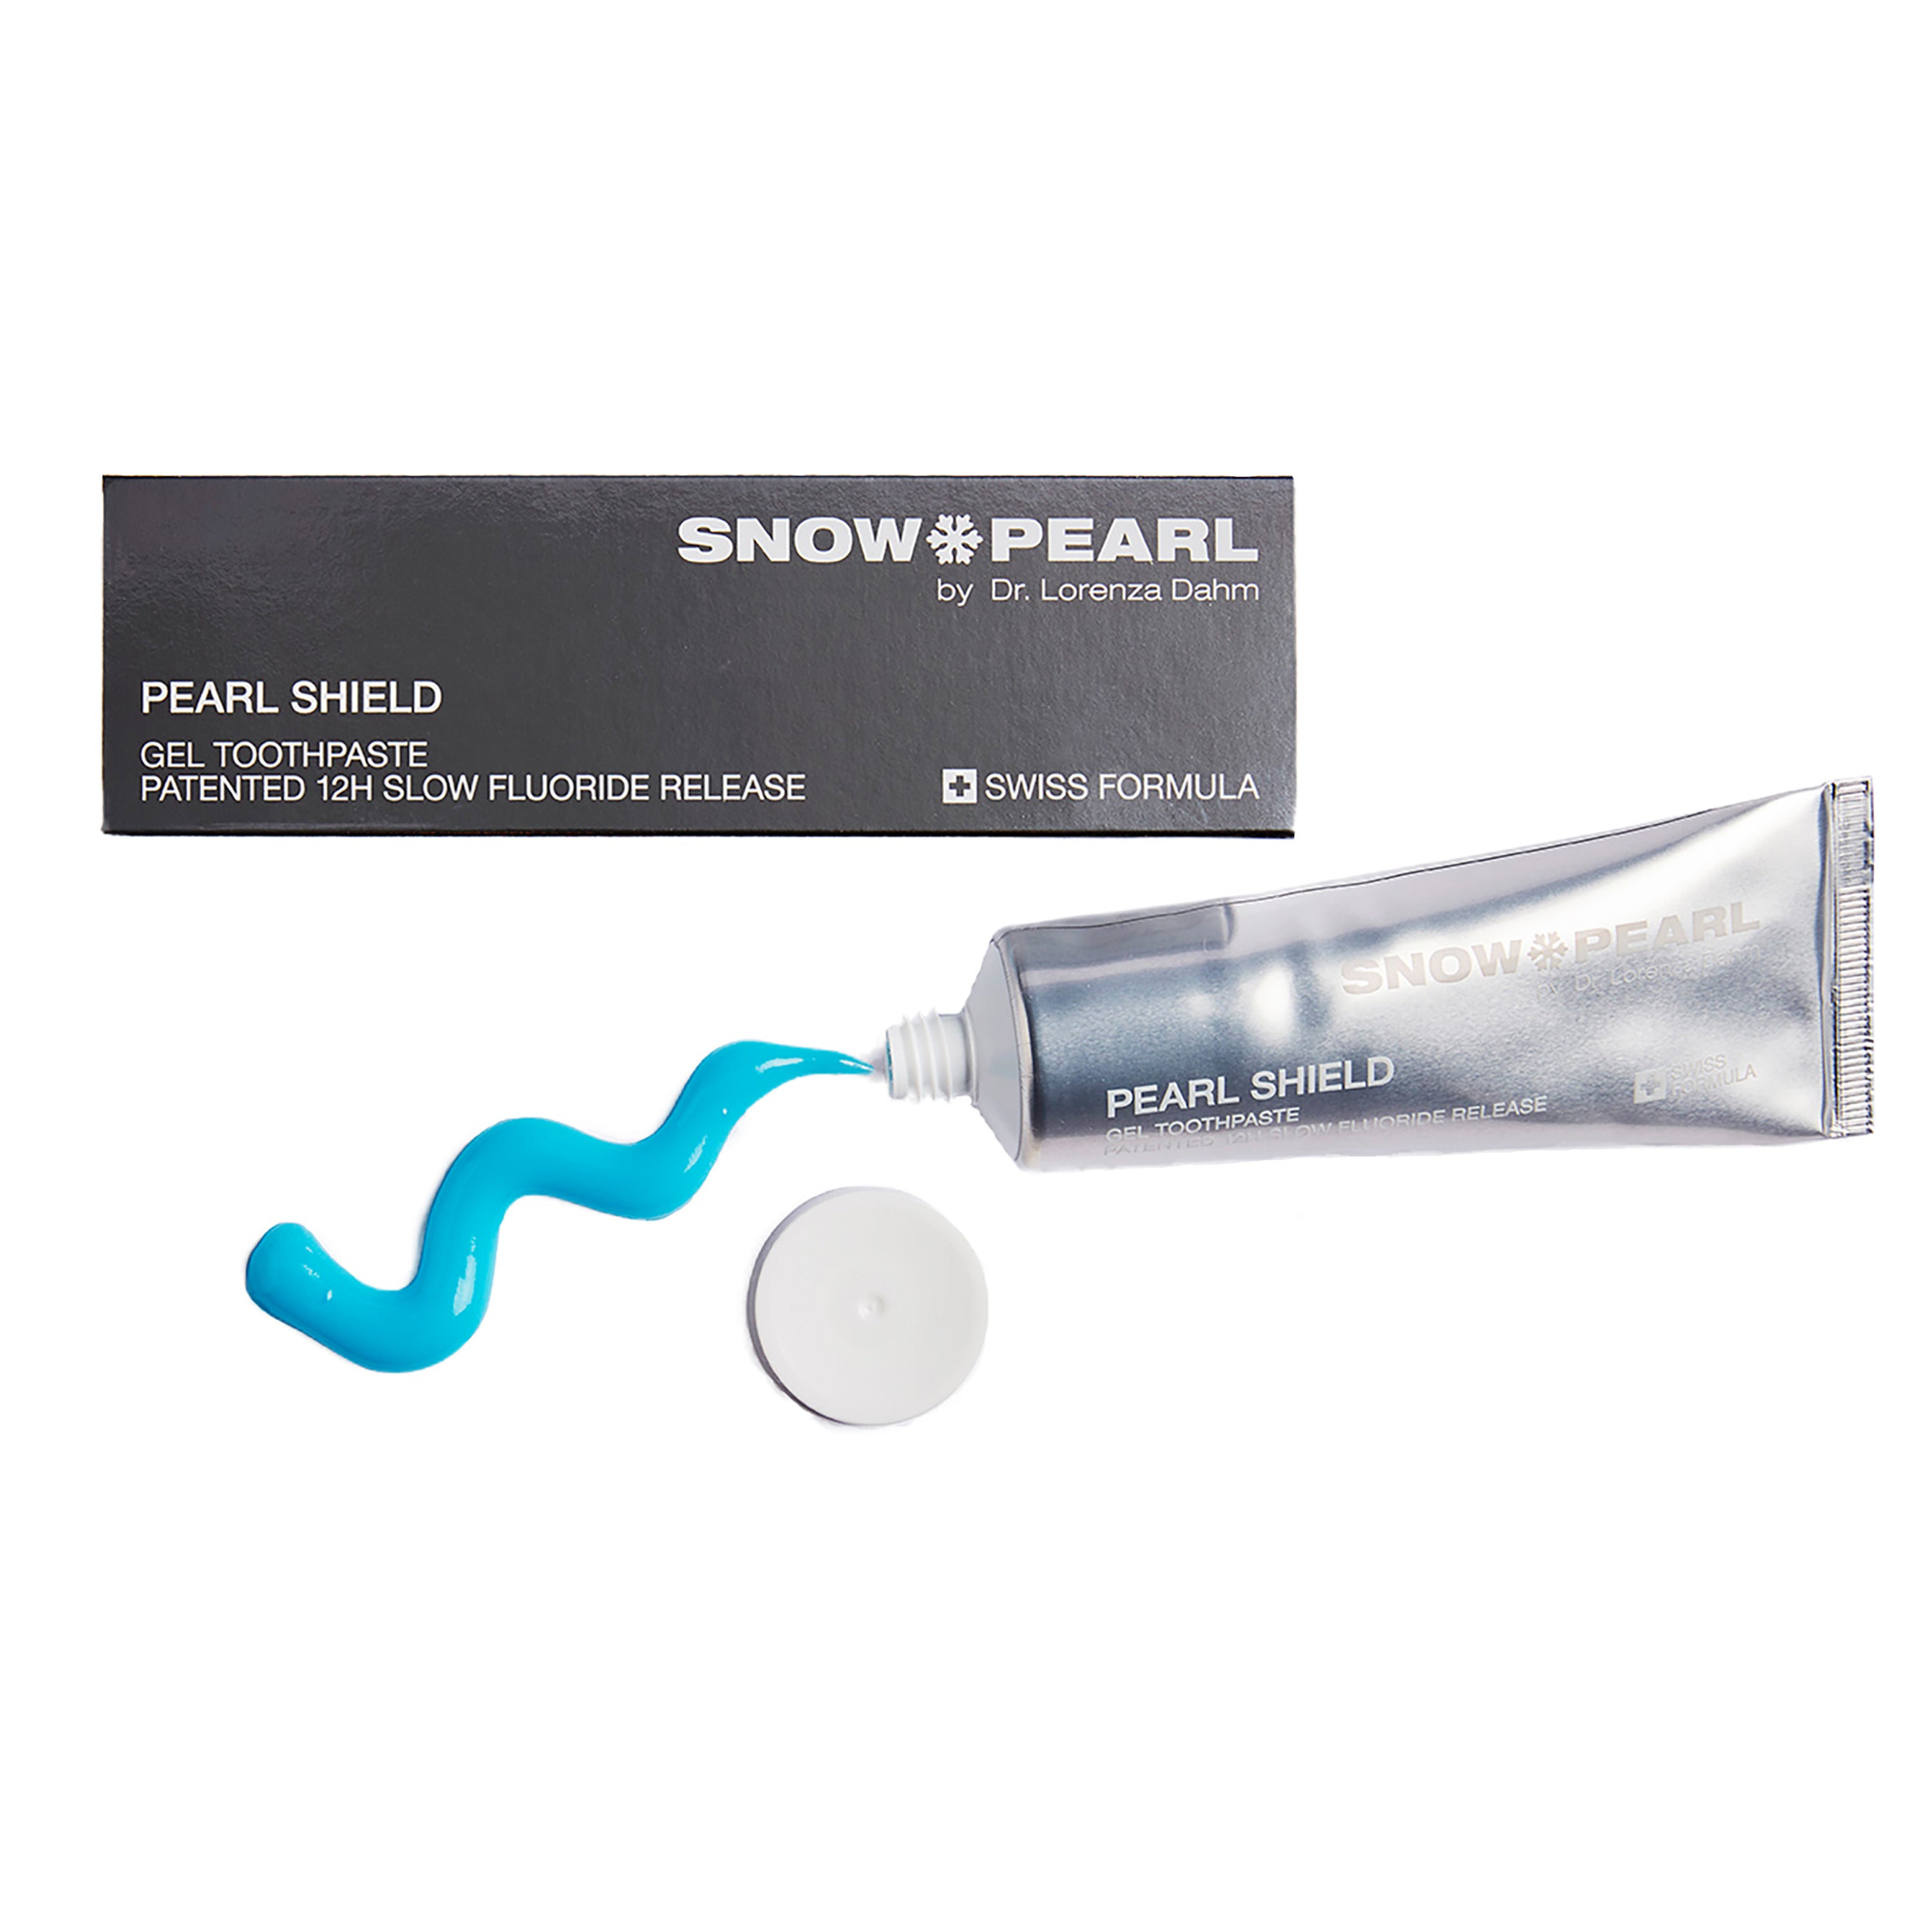 Travel Kit with PEARL SHIELD Gel Toothpaste 75ml - Black